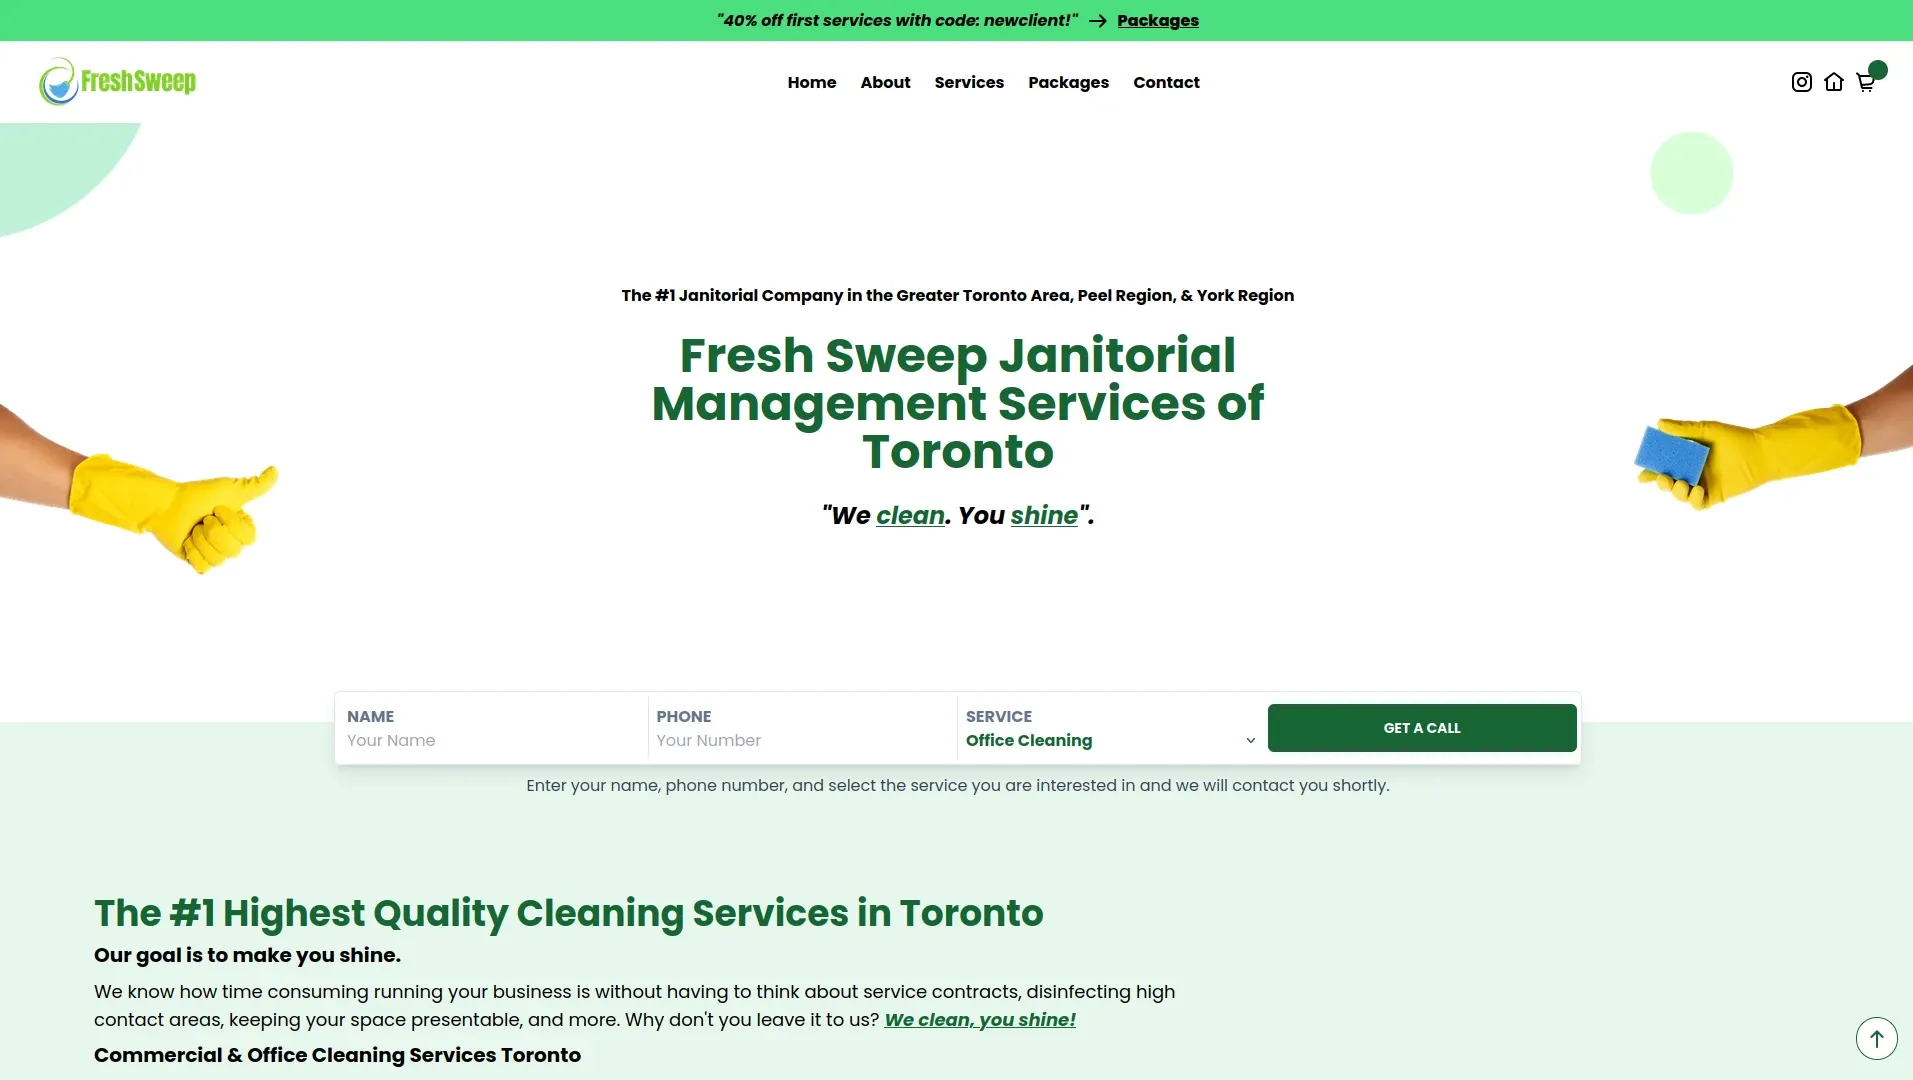 The Freshsweep landing page, featuring e-commerce functionalities for
          online booking